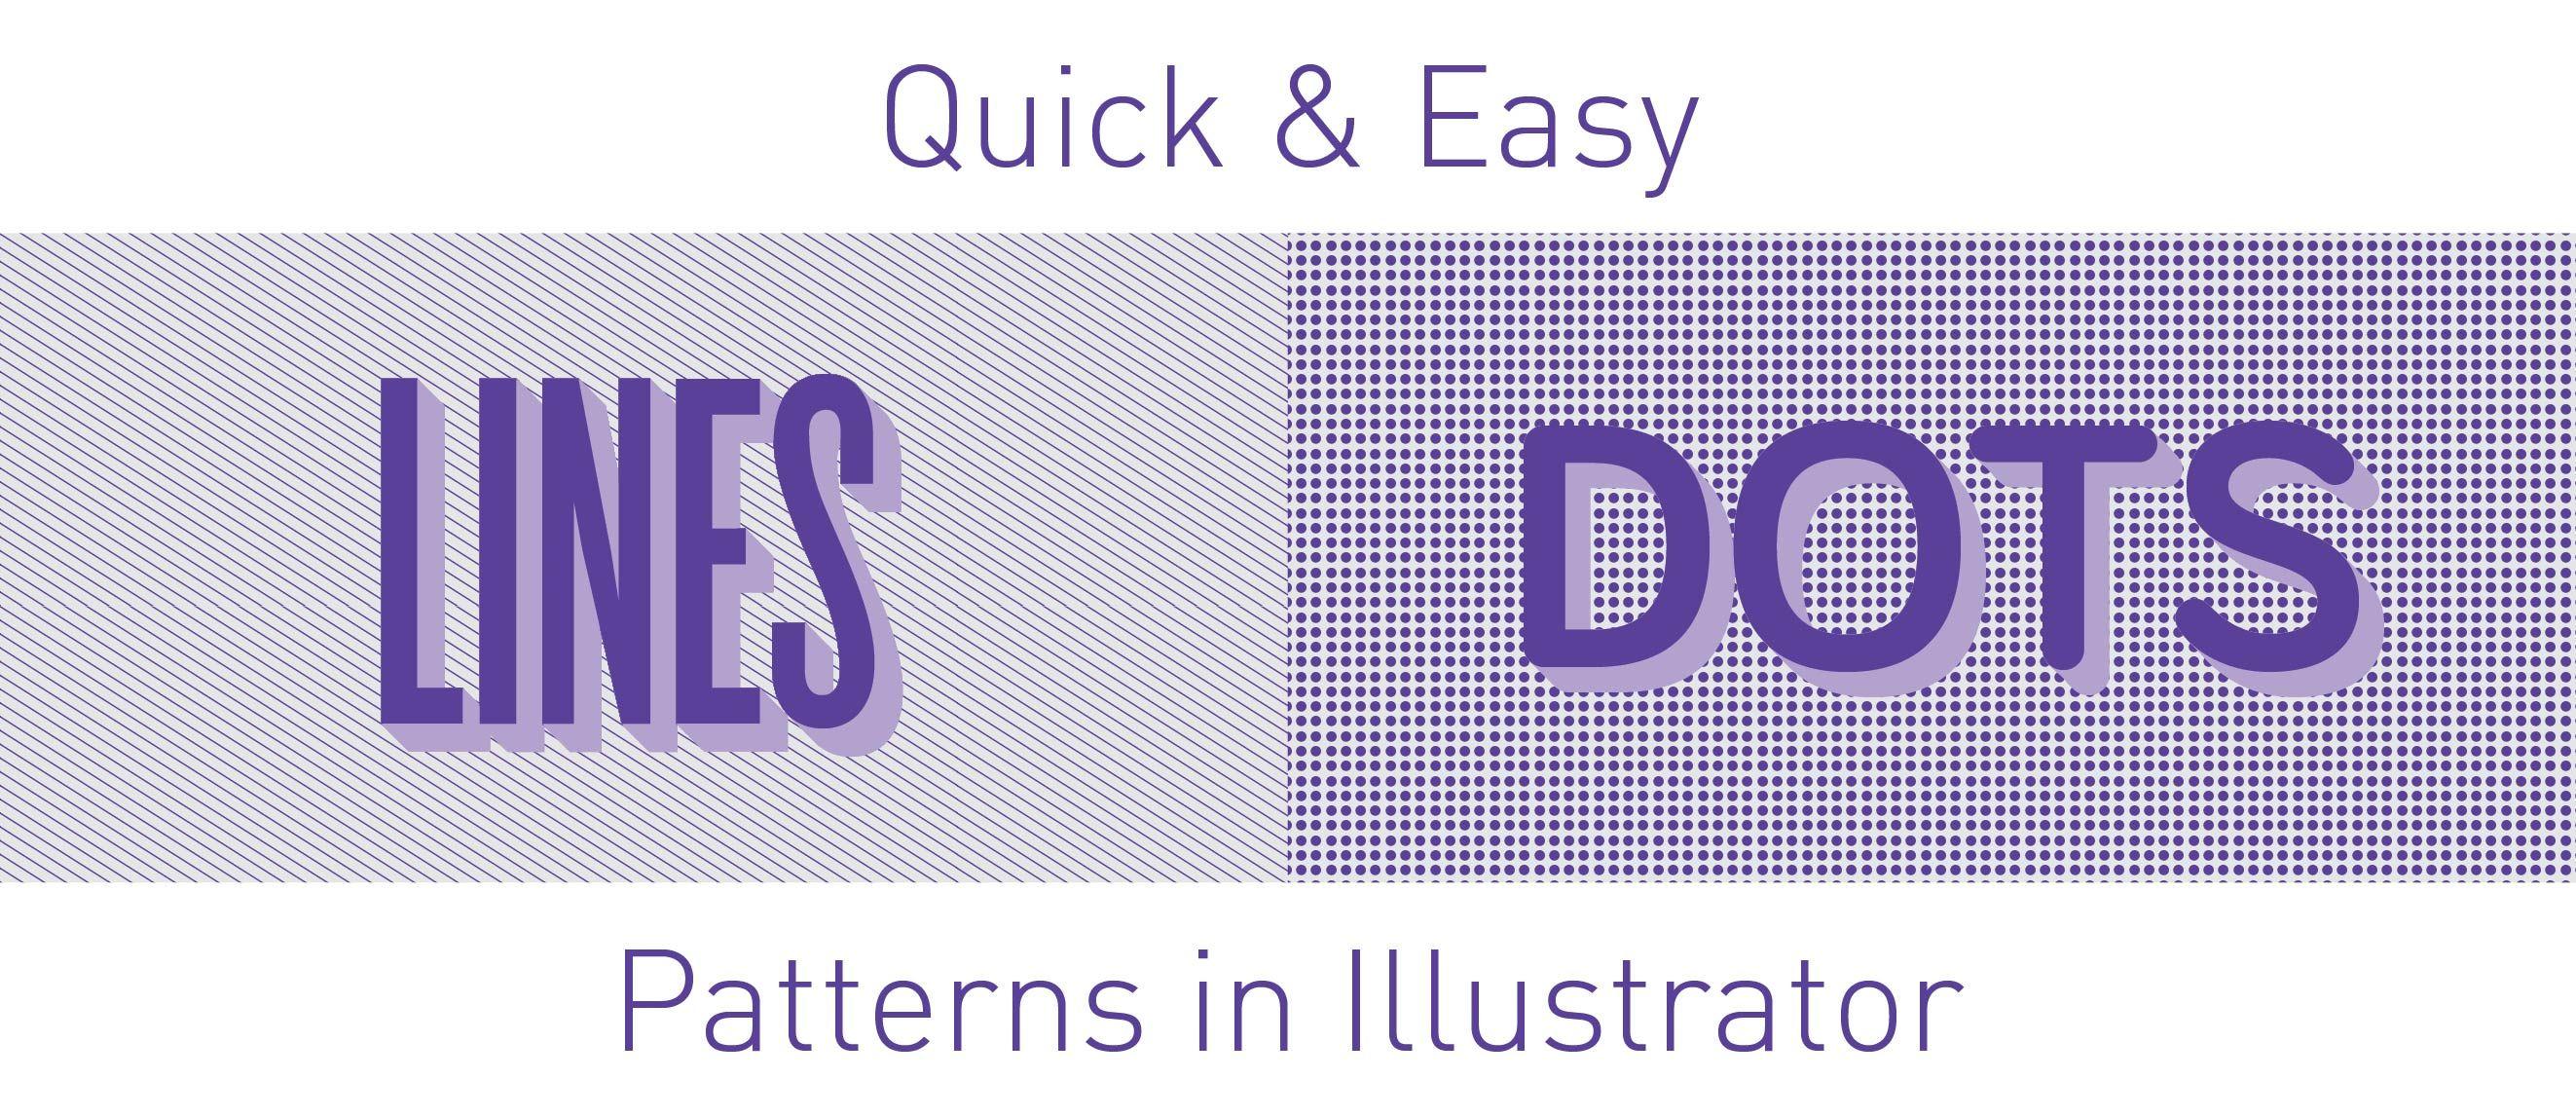 Square White with Slanted Blue Lines Logo - How to make patterns in Illustrator - lines & dots